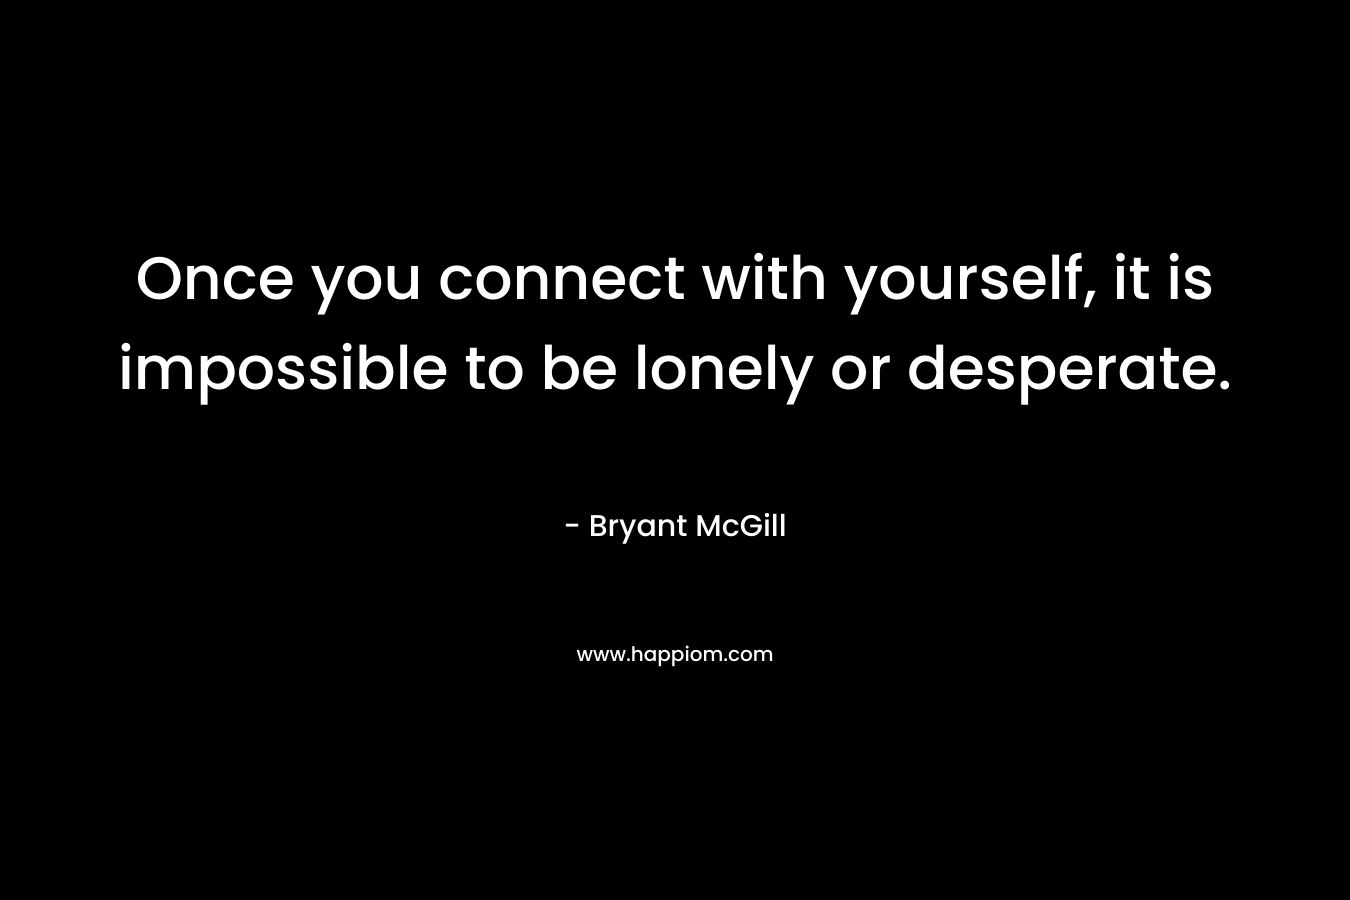 Once you connect with yourself, it is impossible to be lonely or desperate.